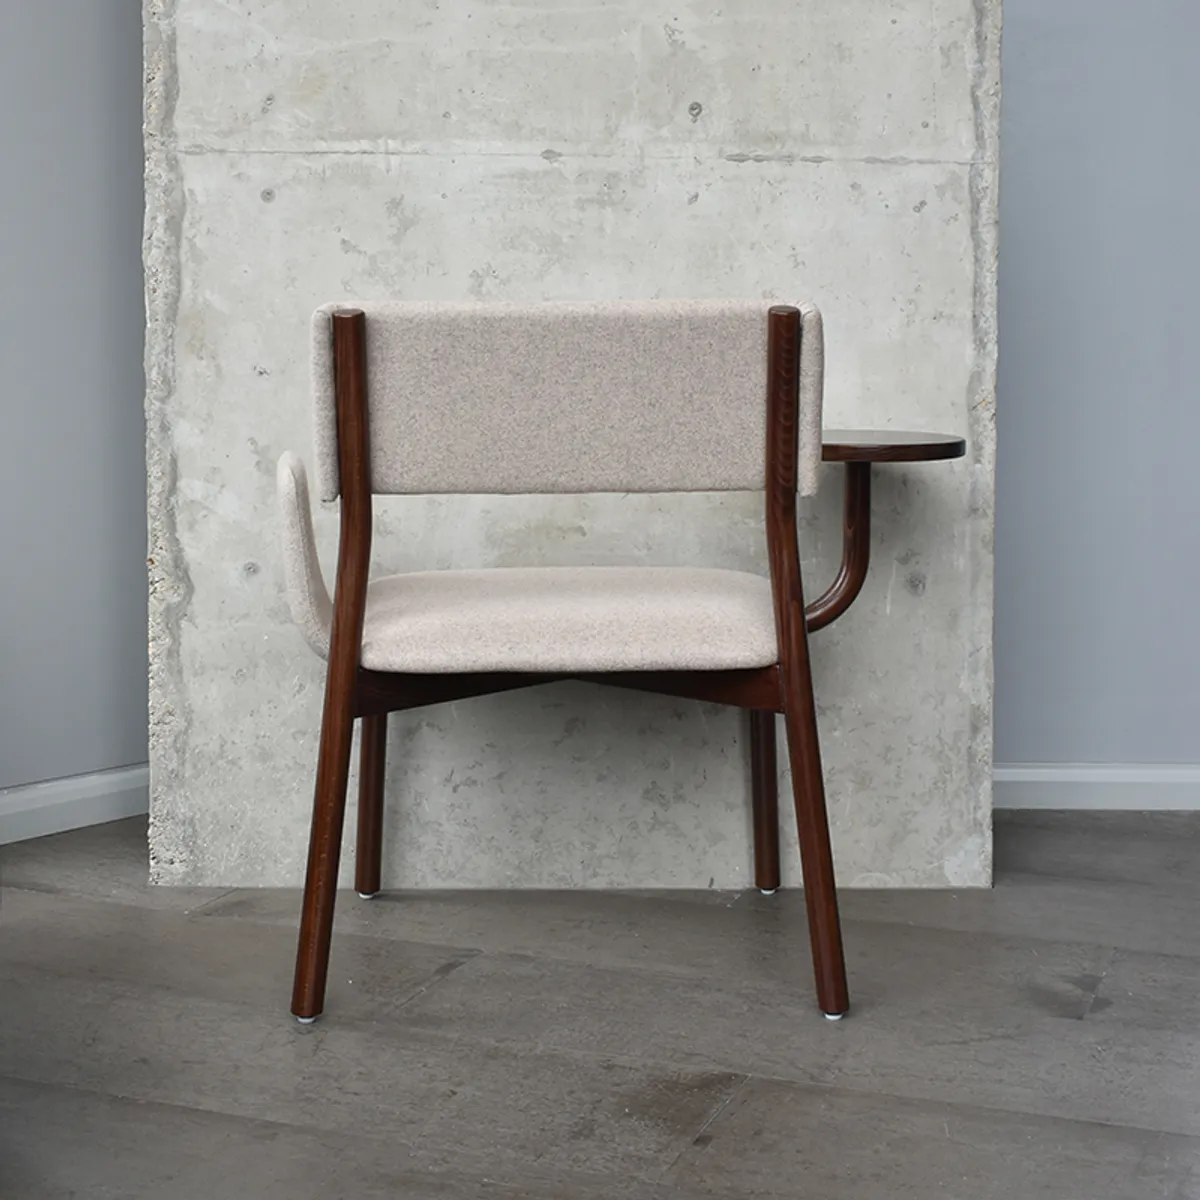 Scuelle Chair New Furniture From Milan 2019 By Inside Out Contracts 020